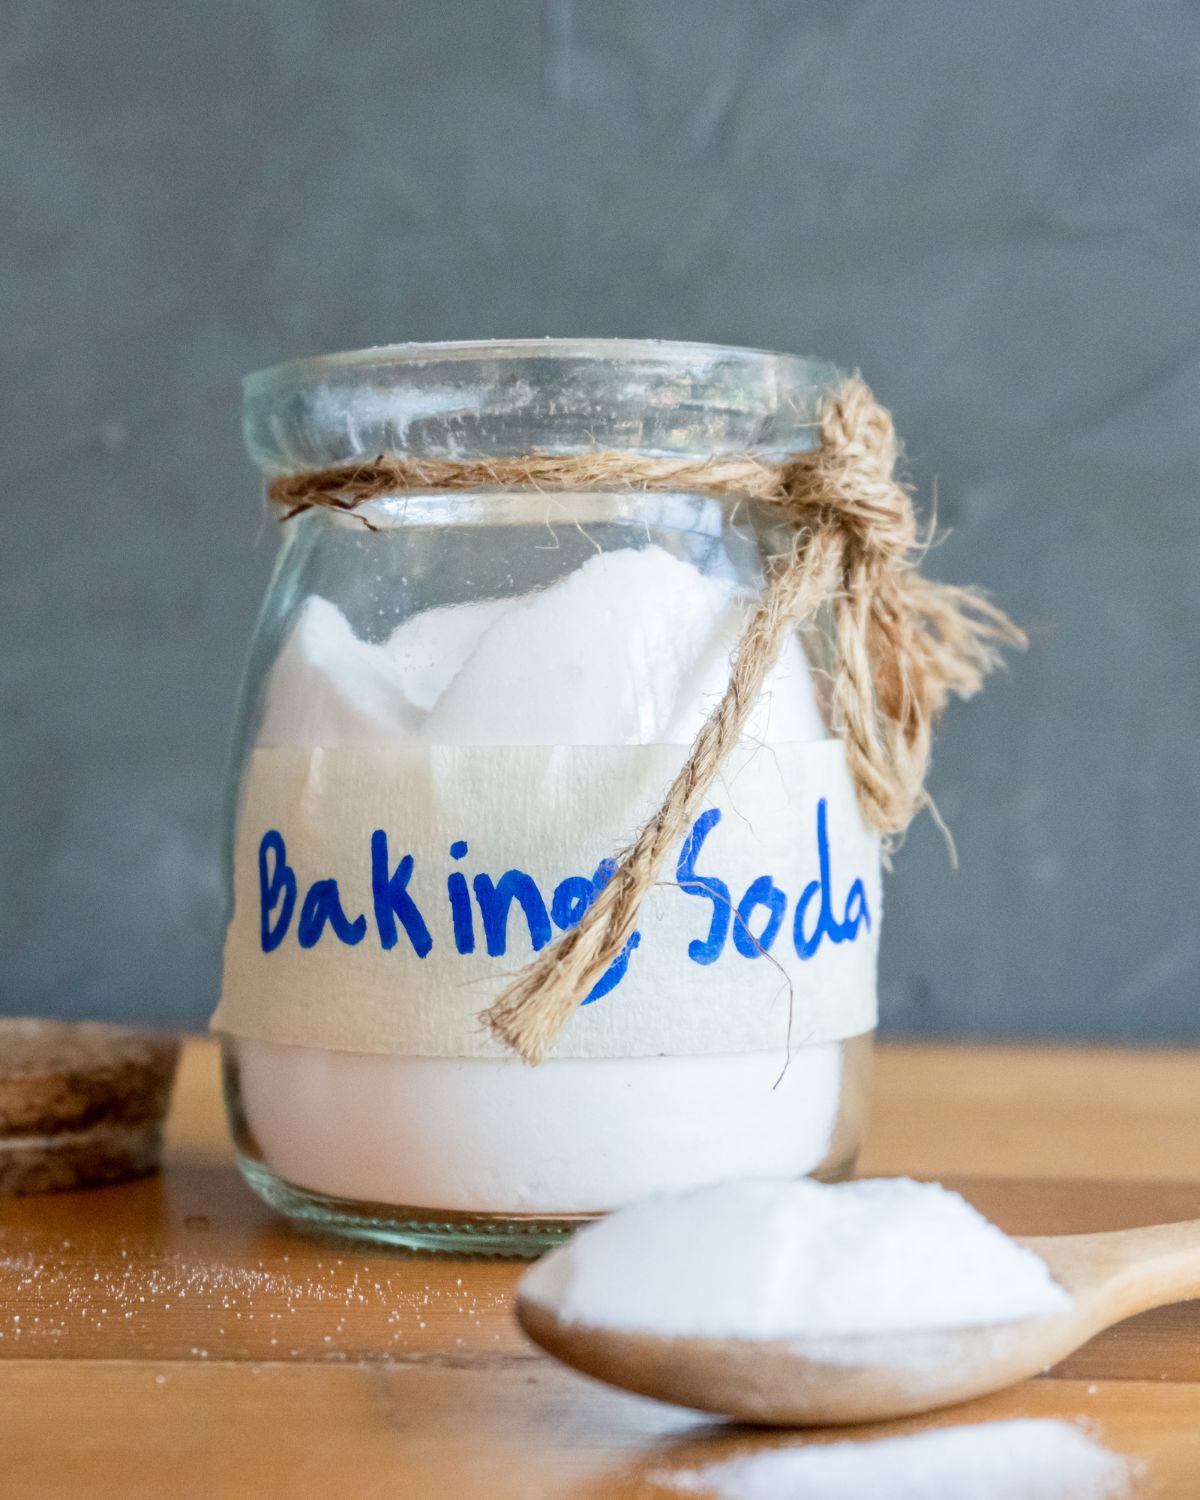 Baking soda to clean your coffee maker.